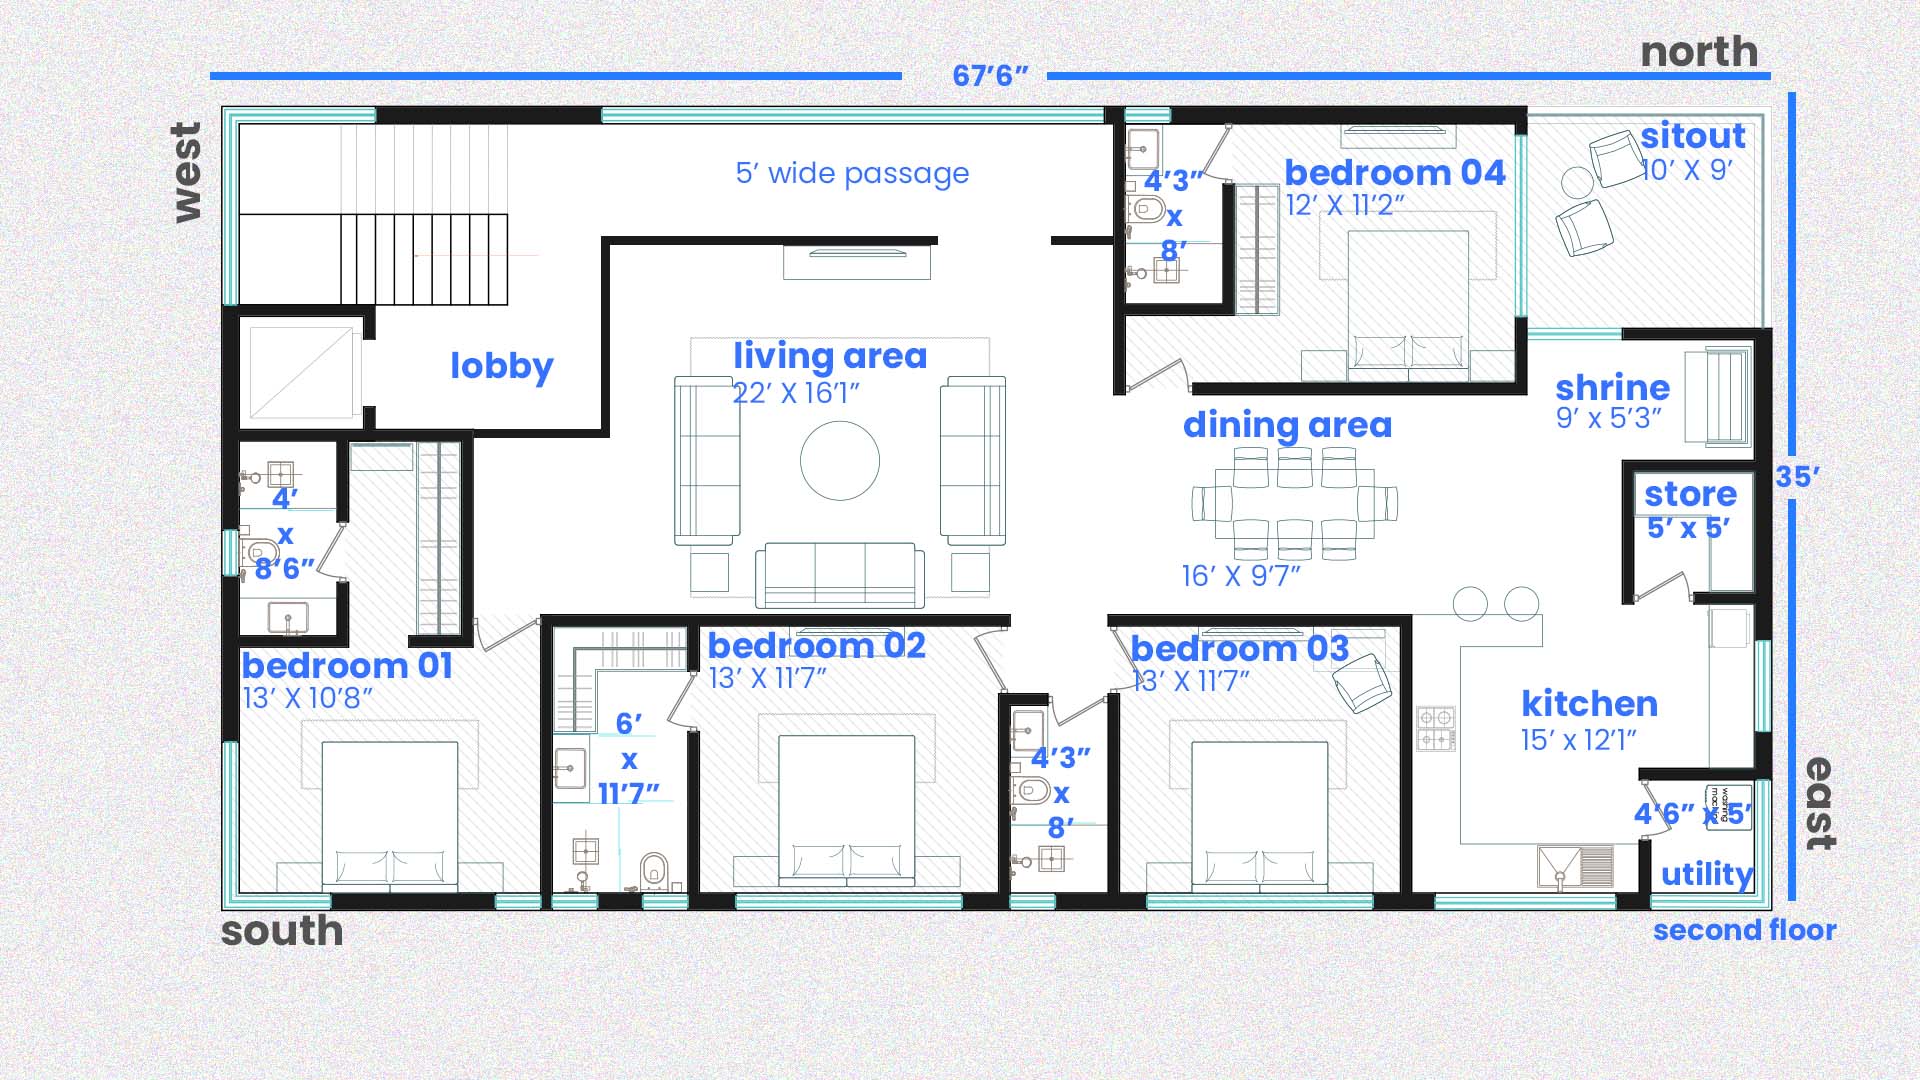 furniture layout for home